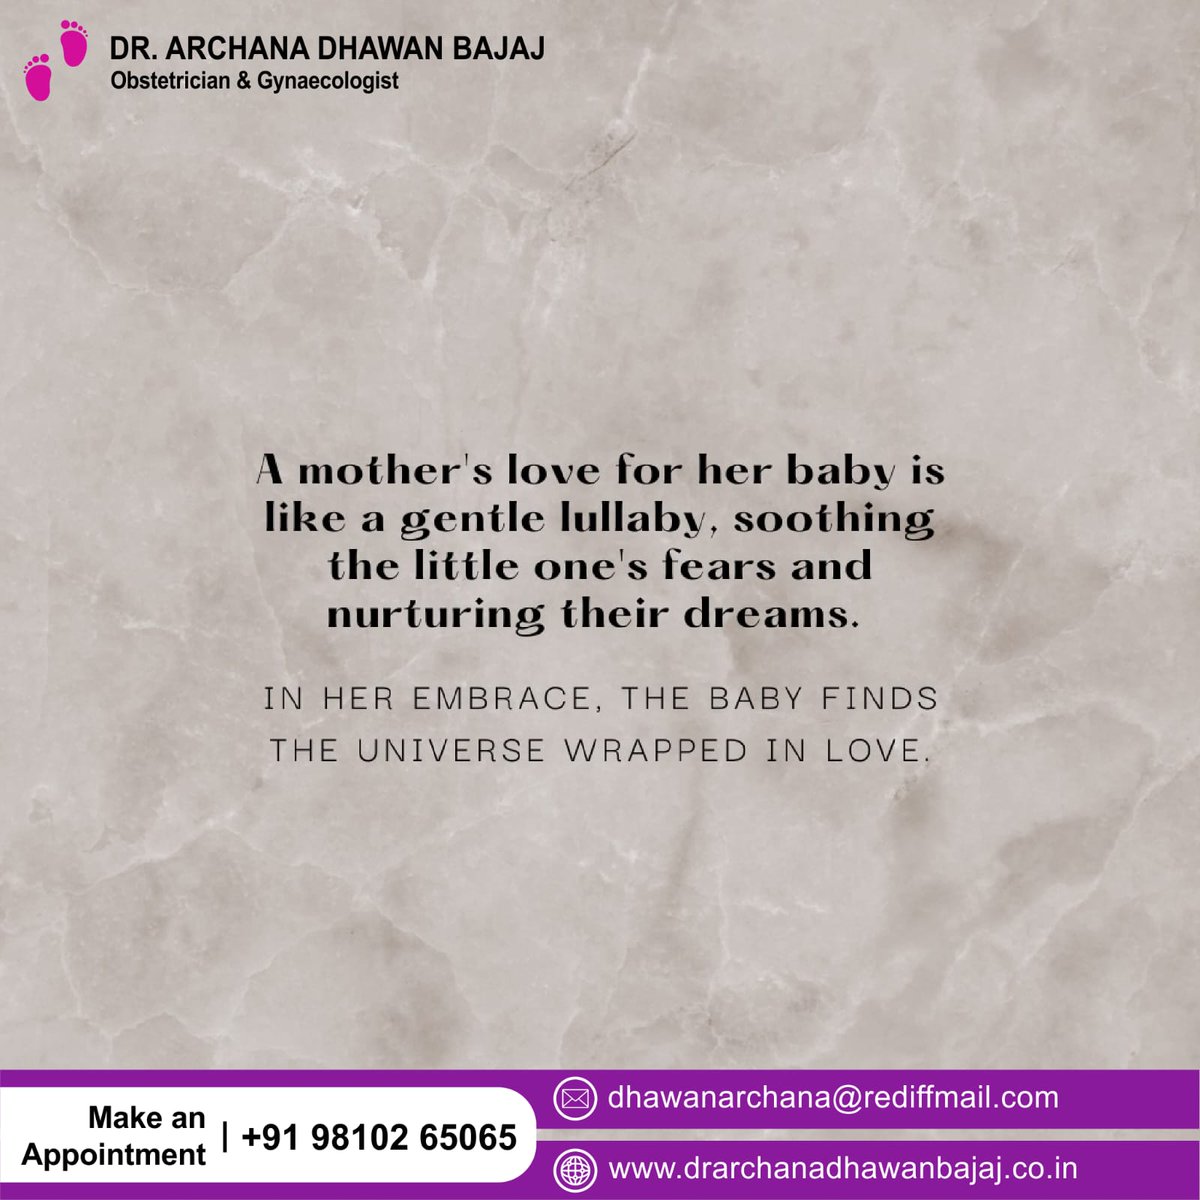 A bond so extraordinary, it's woven with threads of love, joy, and endless cuddles. 💞 #MomAndBaby #SpecialConnection

Make An Appointment: +91-9810265065
 
For information visit our website:
drarchanadhawanbajaj.co.in

 #ivfsupport #ivfsuccess #INDIA #IND #Australia #Bangladesh